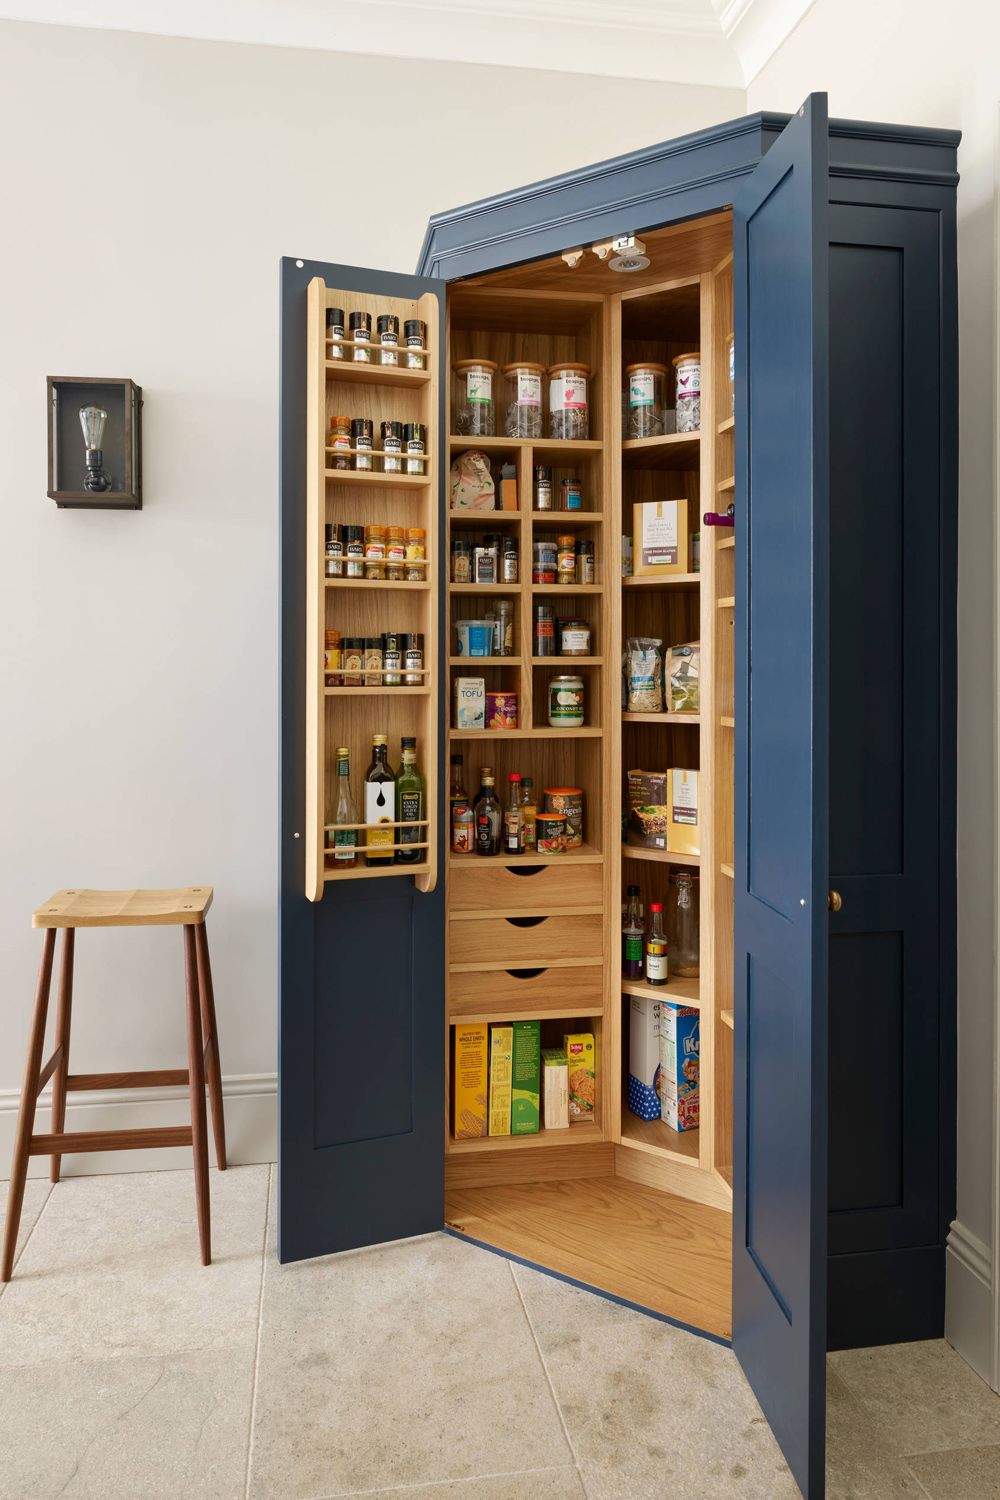 Effective management of the small
kitchen  storage cabinet